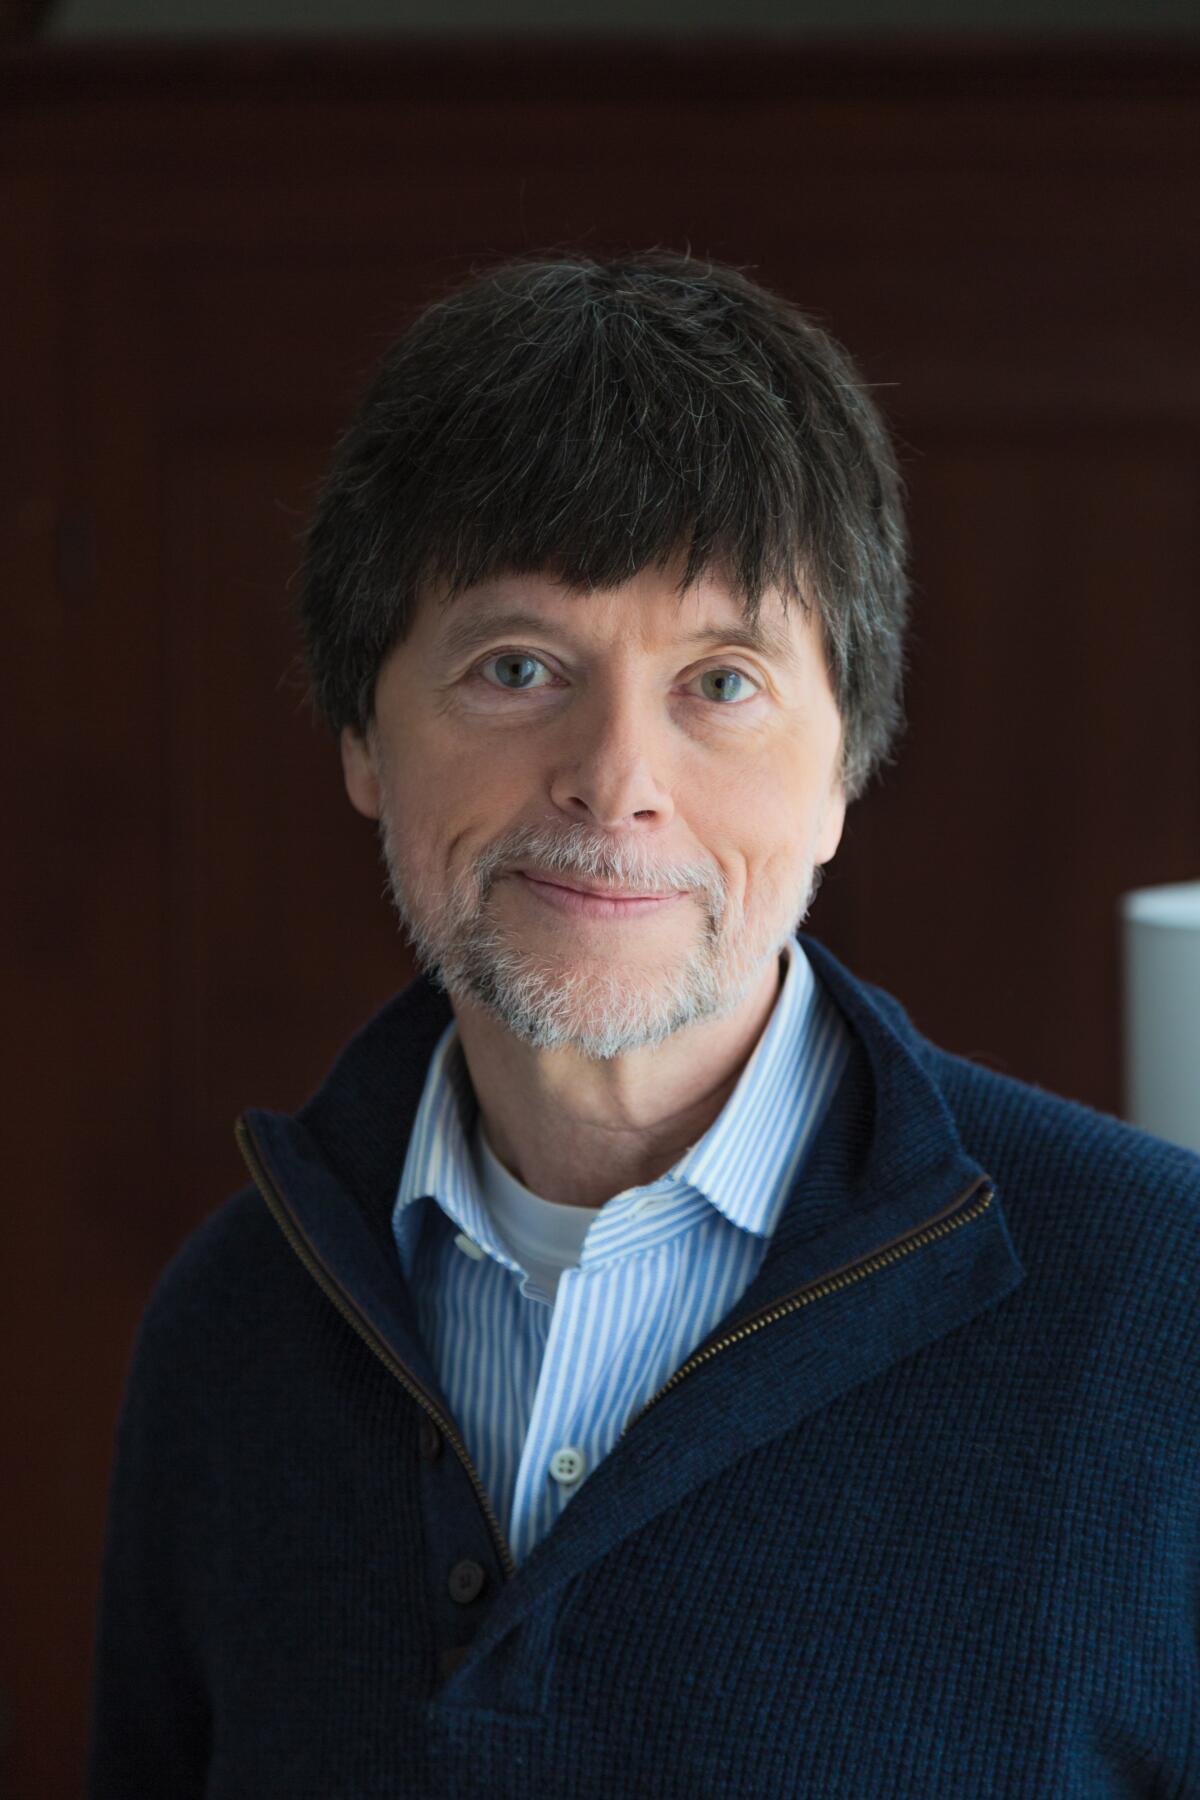 A portrait photograph of Ken Burns, co-director of the new PBS documentary, "Hemingway."